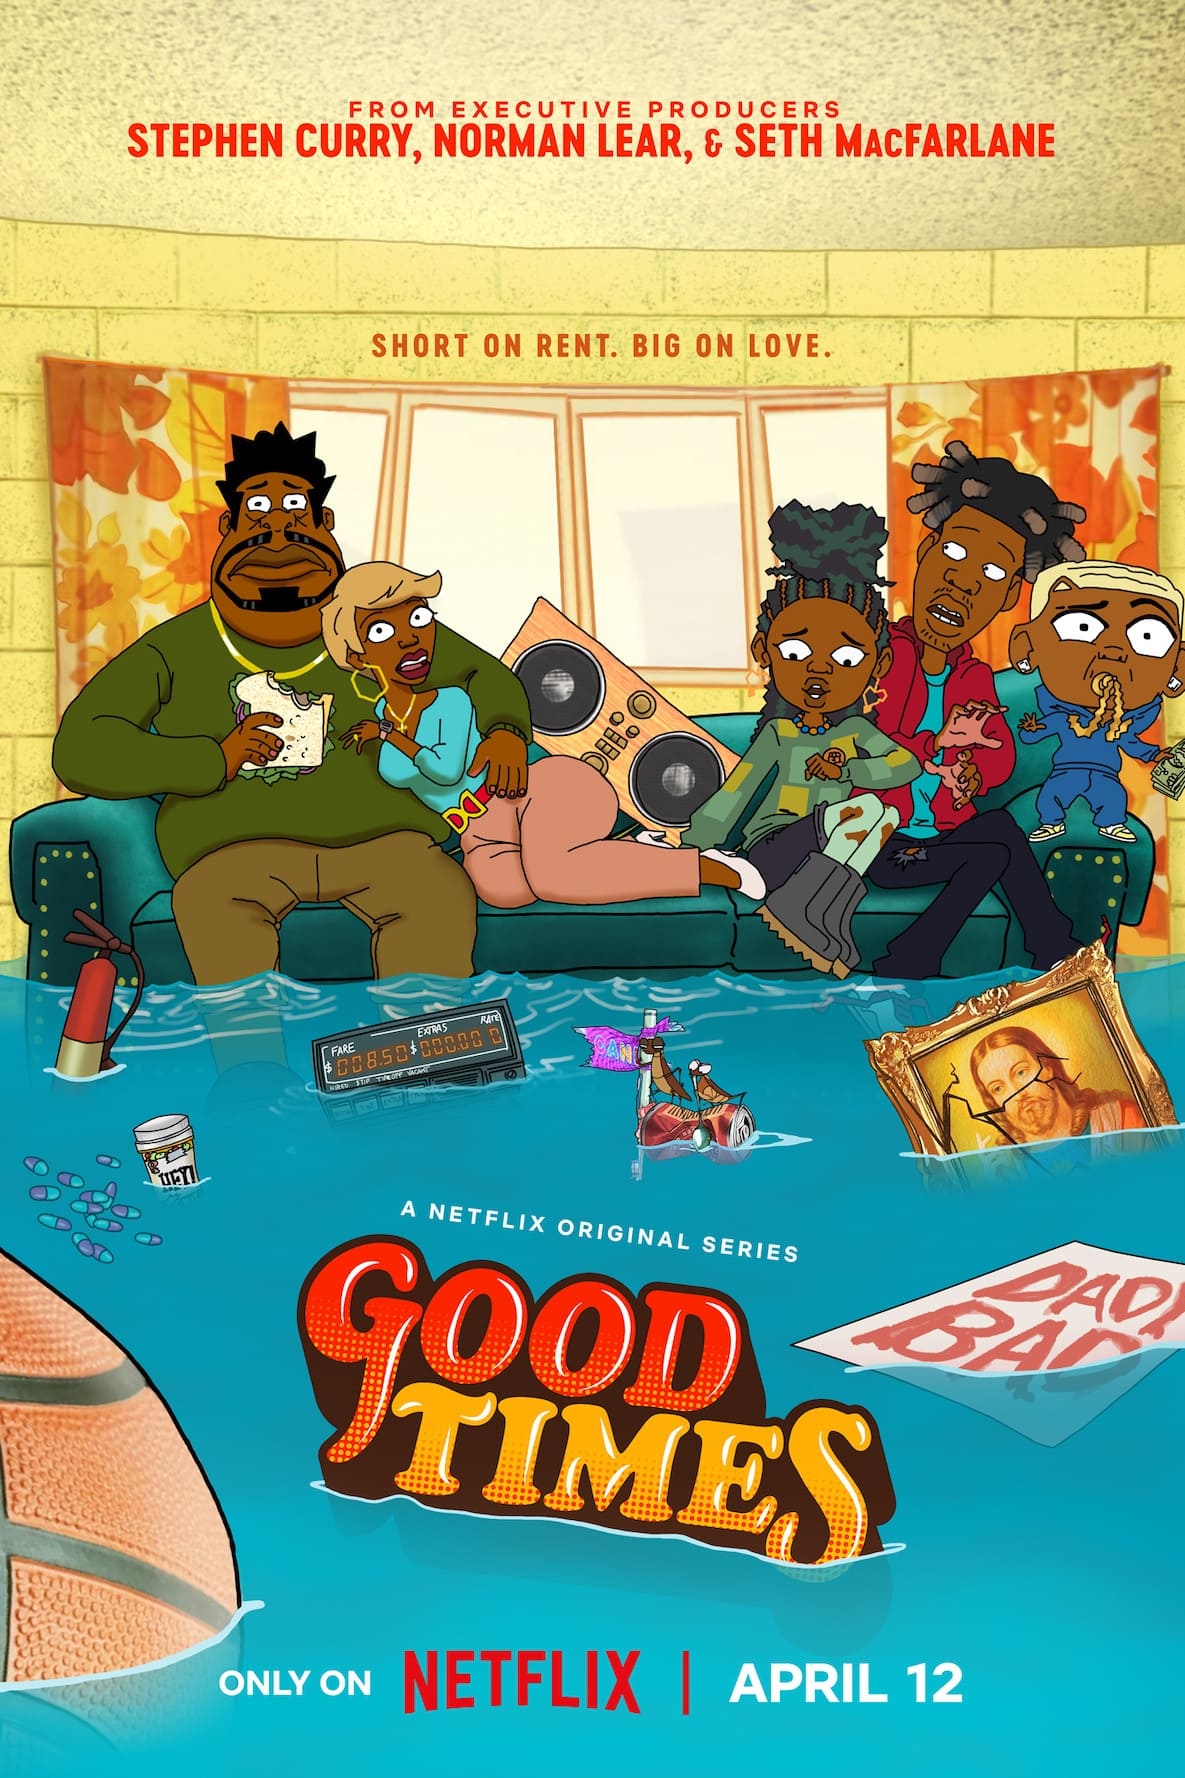 Good Times Netflix Series Is Not An Accurate Representation of Black People